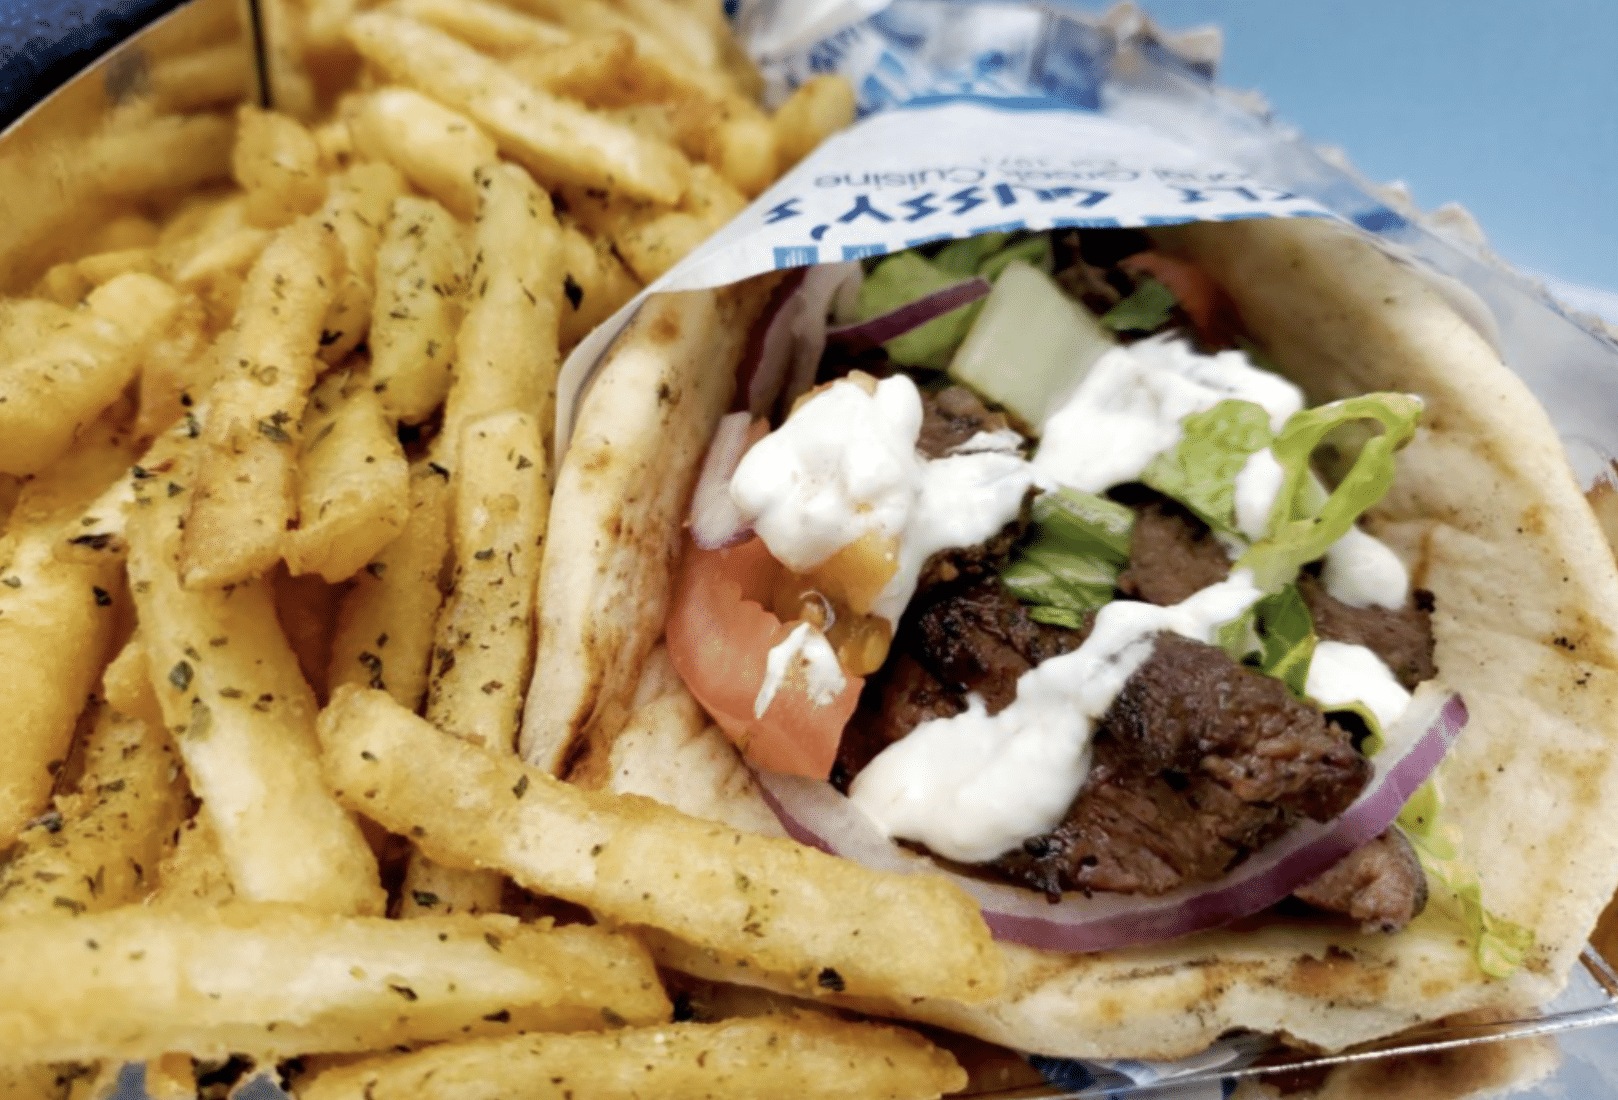 Uncle Gussy's gyro